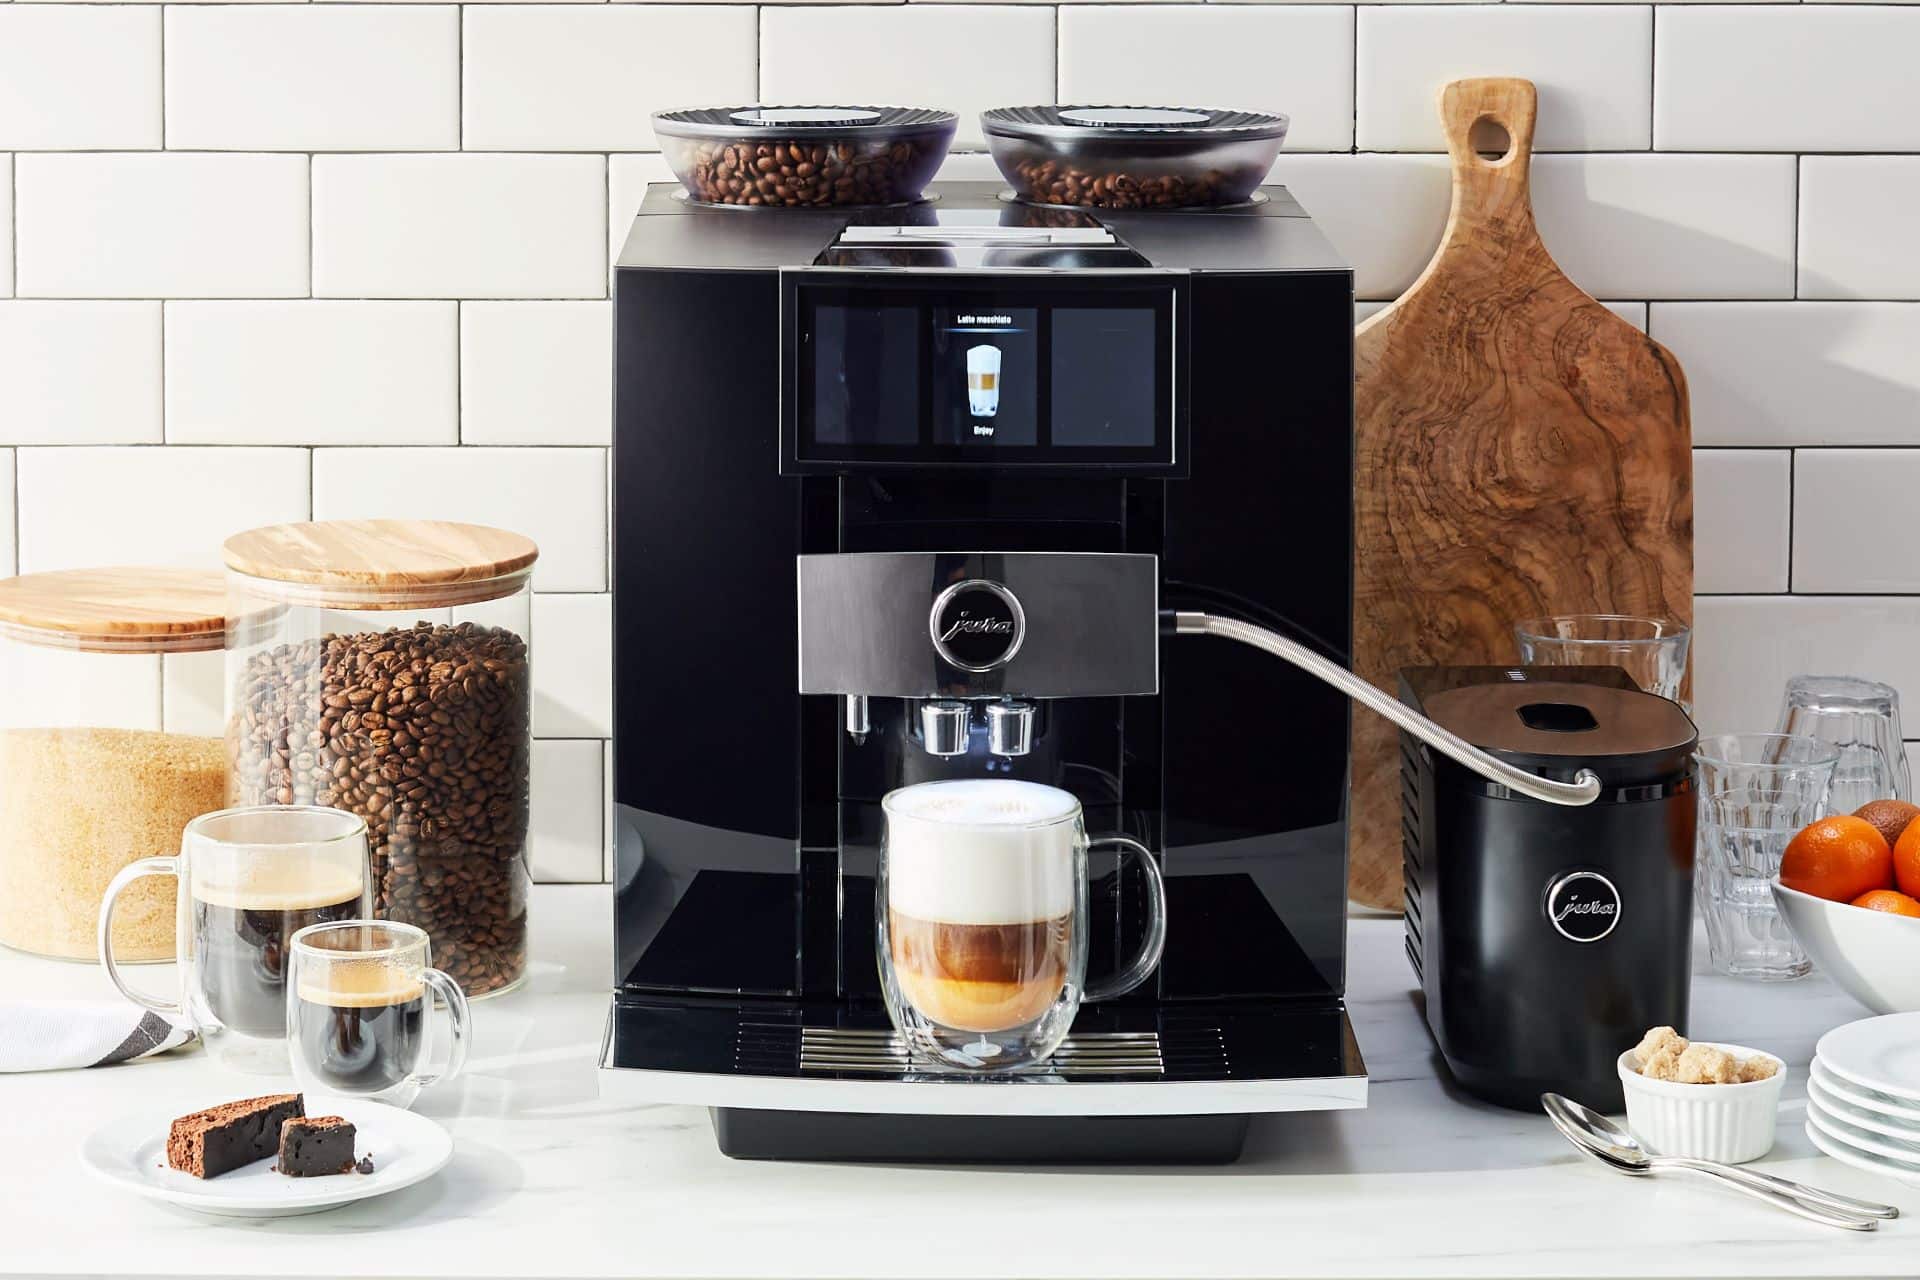 Why The New JURA GIGA 10 Is The Best Gift For The Coffee Lover In Your Life